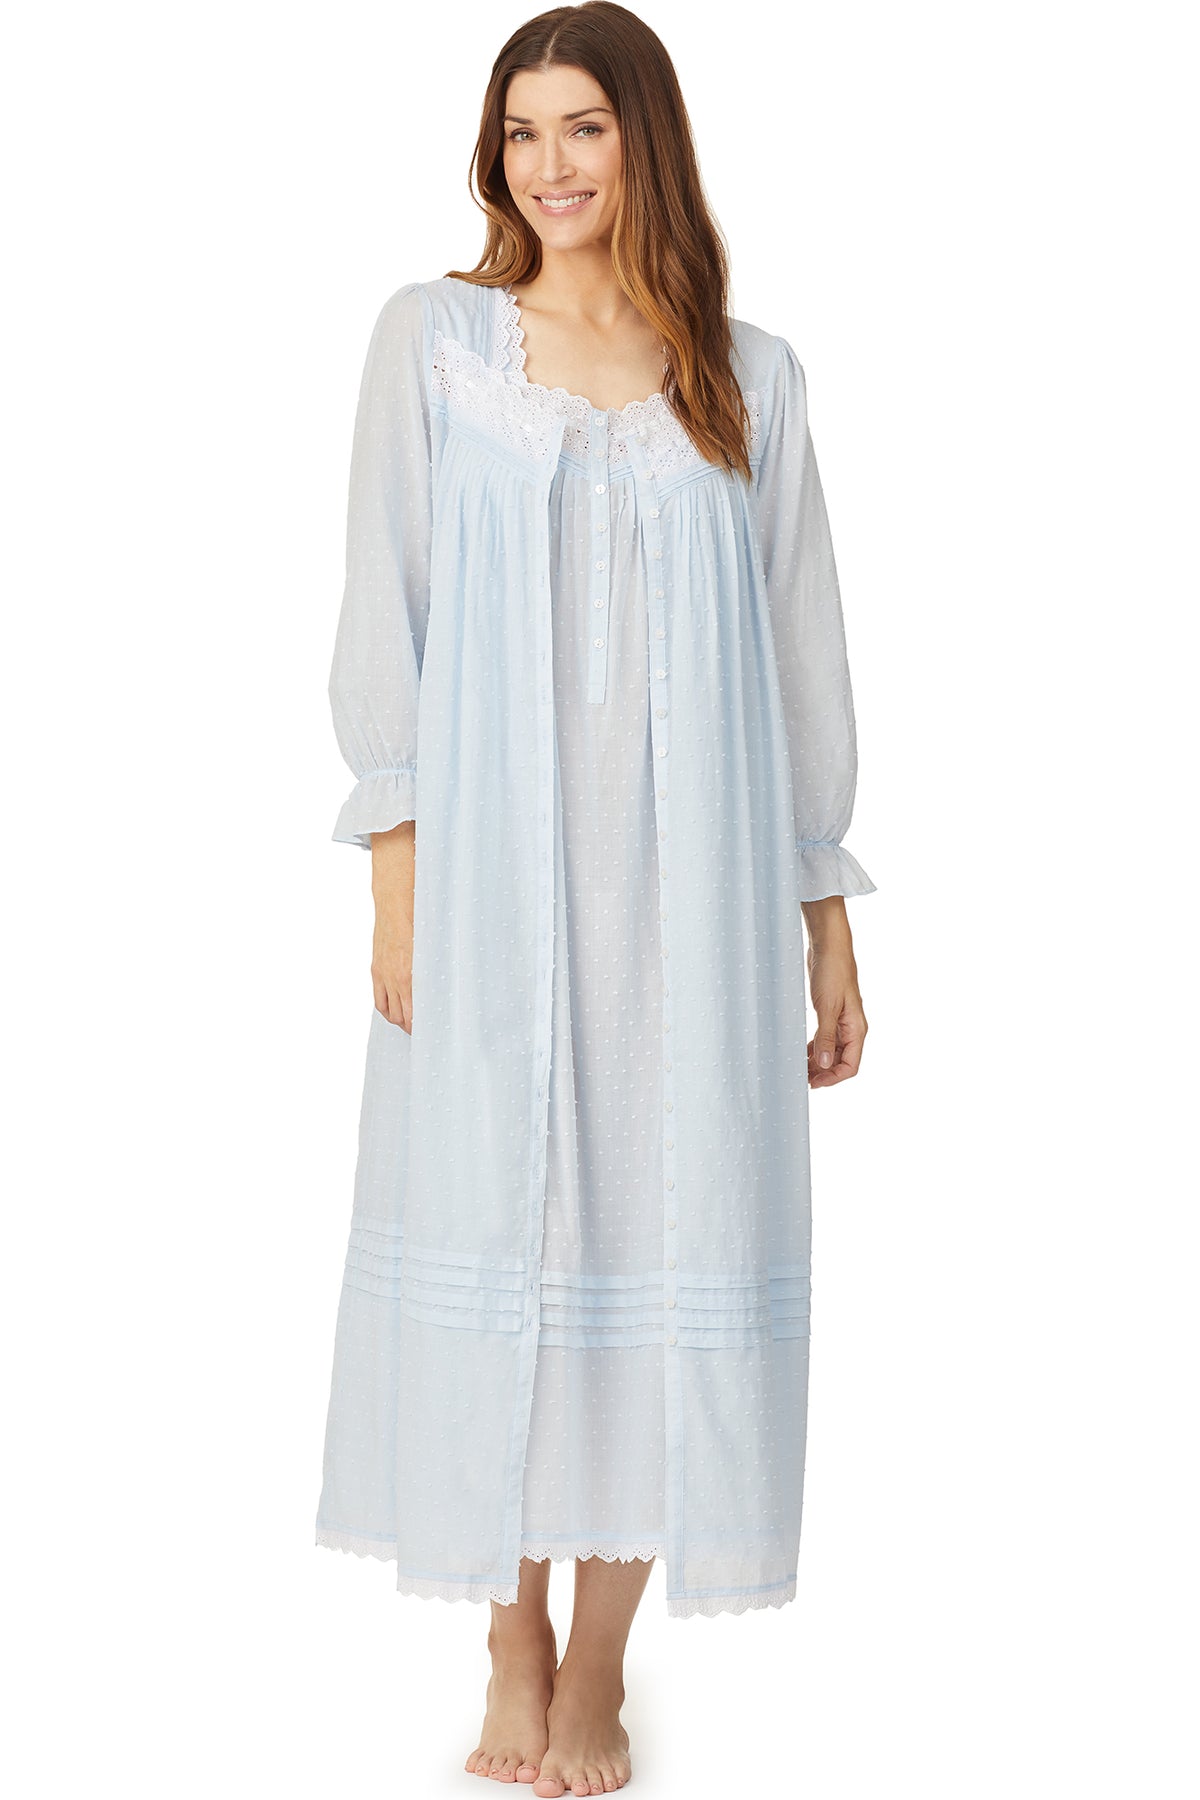 A lady wearing a blue long sleeve button front robe with white dot pattern.